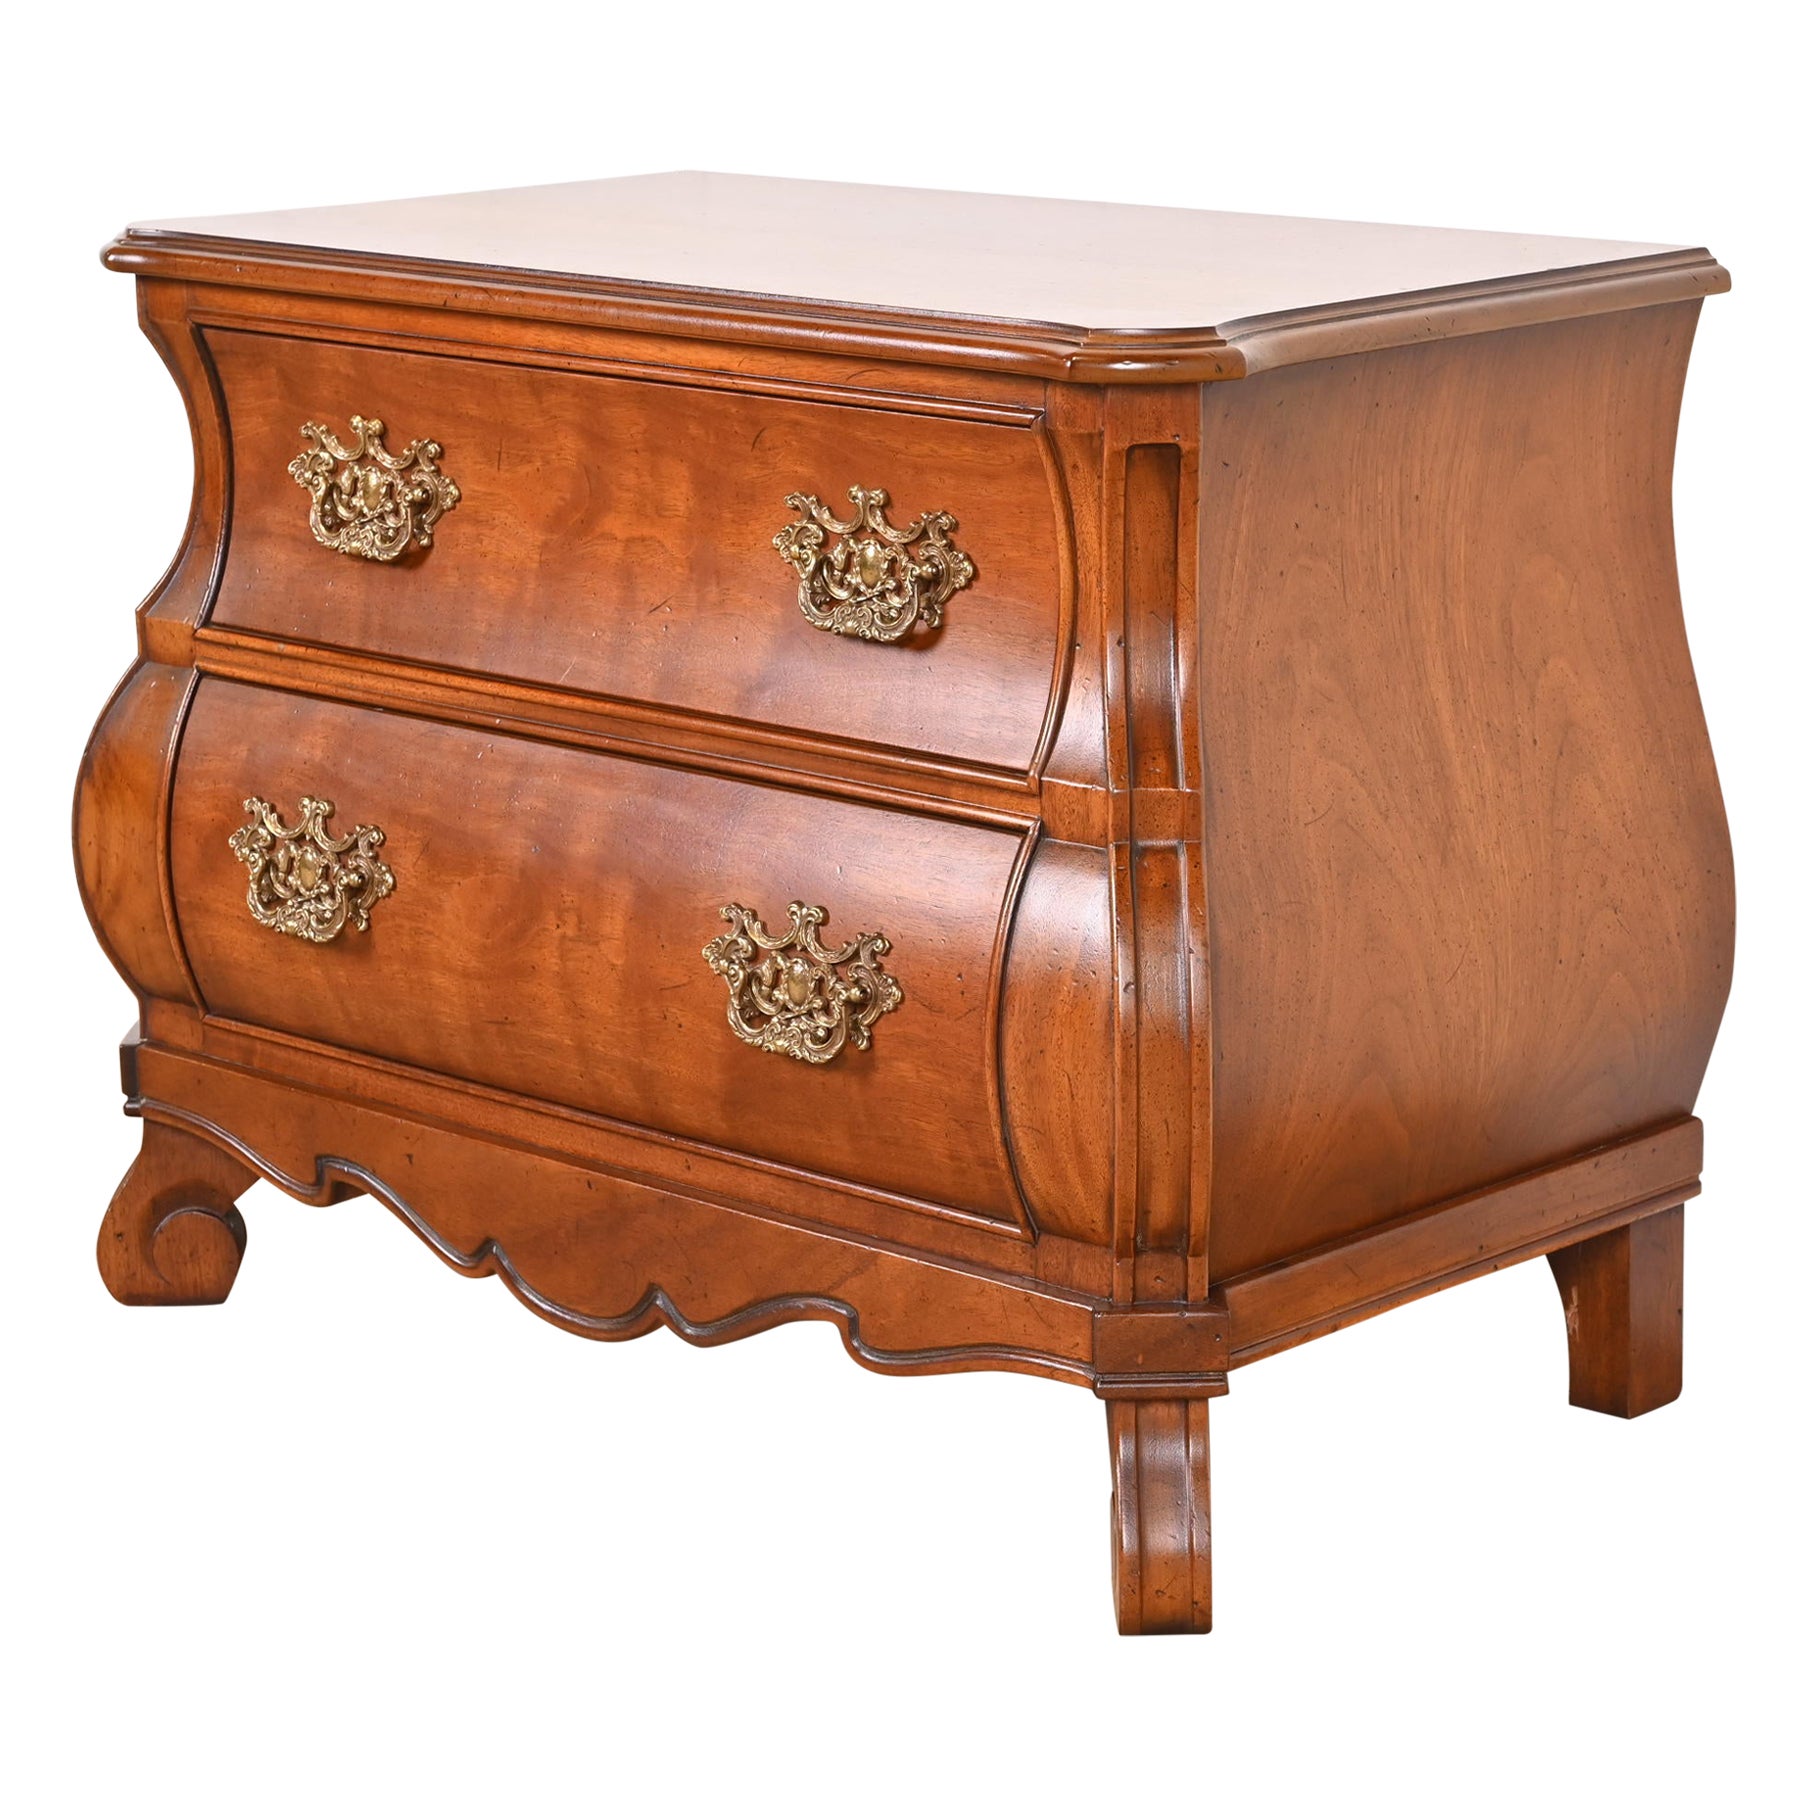 Henredon Italian Louis XV Cherry Wood Bombay Form Commode or Bedside Chest